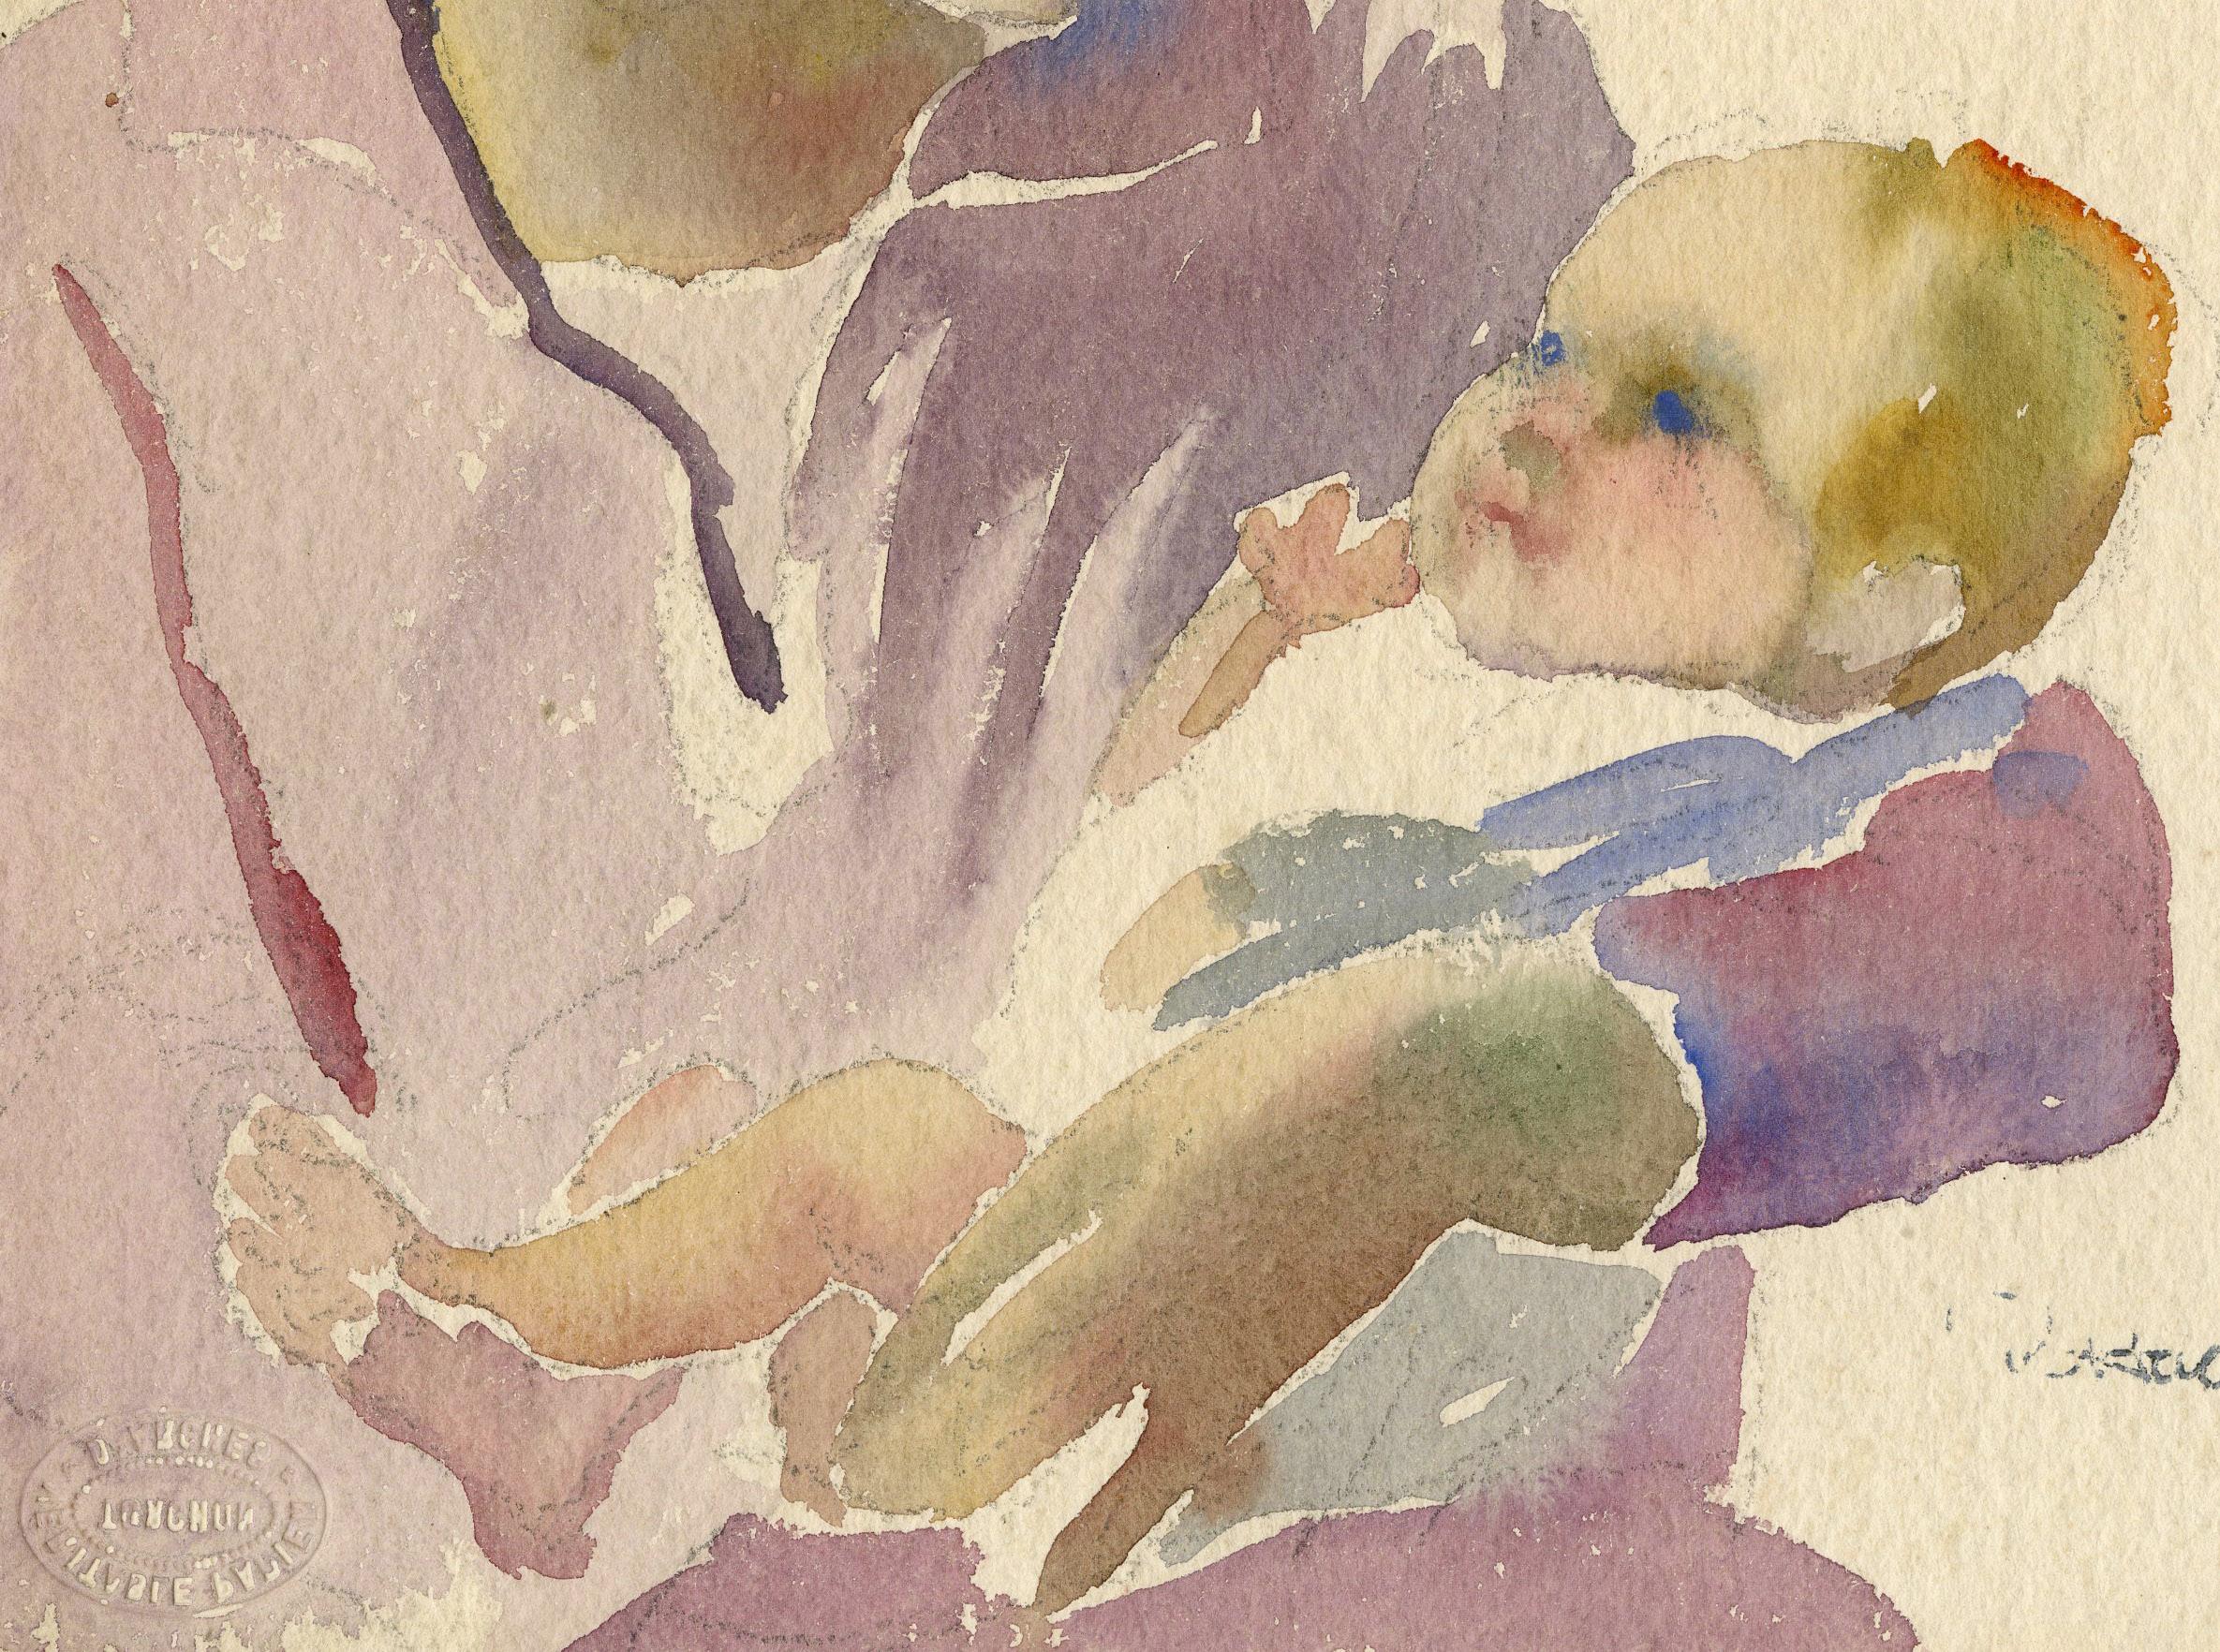 Woman with child
Watercolor on paper, c. 1930
Signed with the estate stamp lower right (see photo)
Exhibited: Marbella Gallery, New York
Illustrated: Robert Hallowell: An Artist Rediscovered, Marbella Gallery, n.d., No. 40, page 12
Provenance: